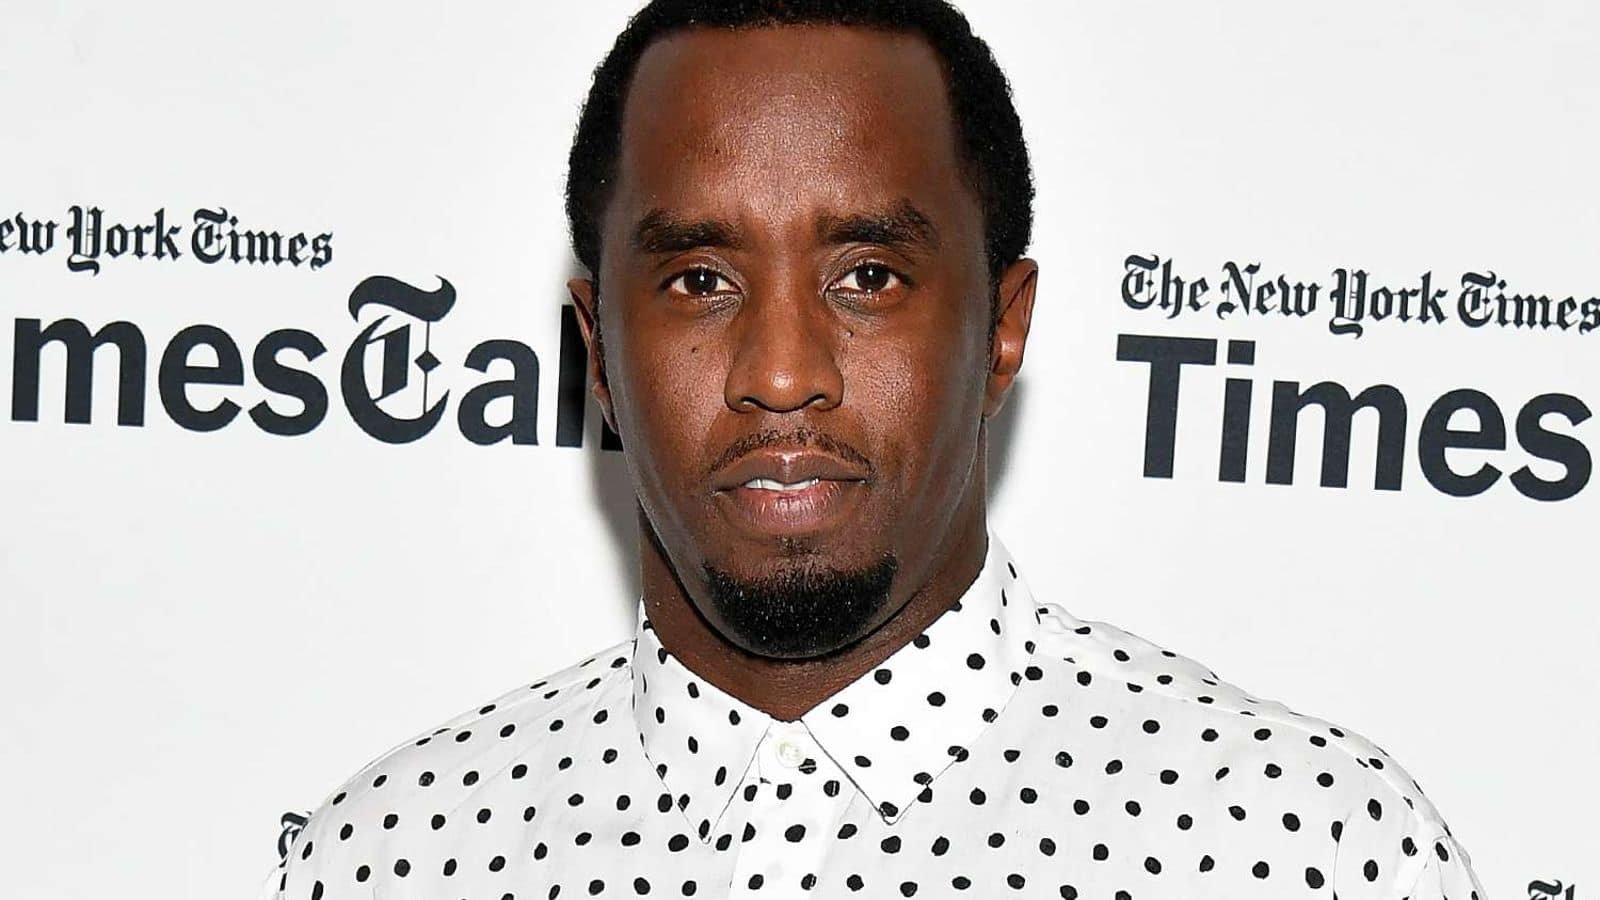 Sean 'Diddy' Combs is back on Instagram following home raids